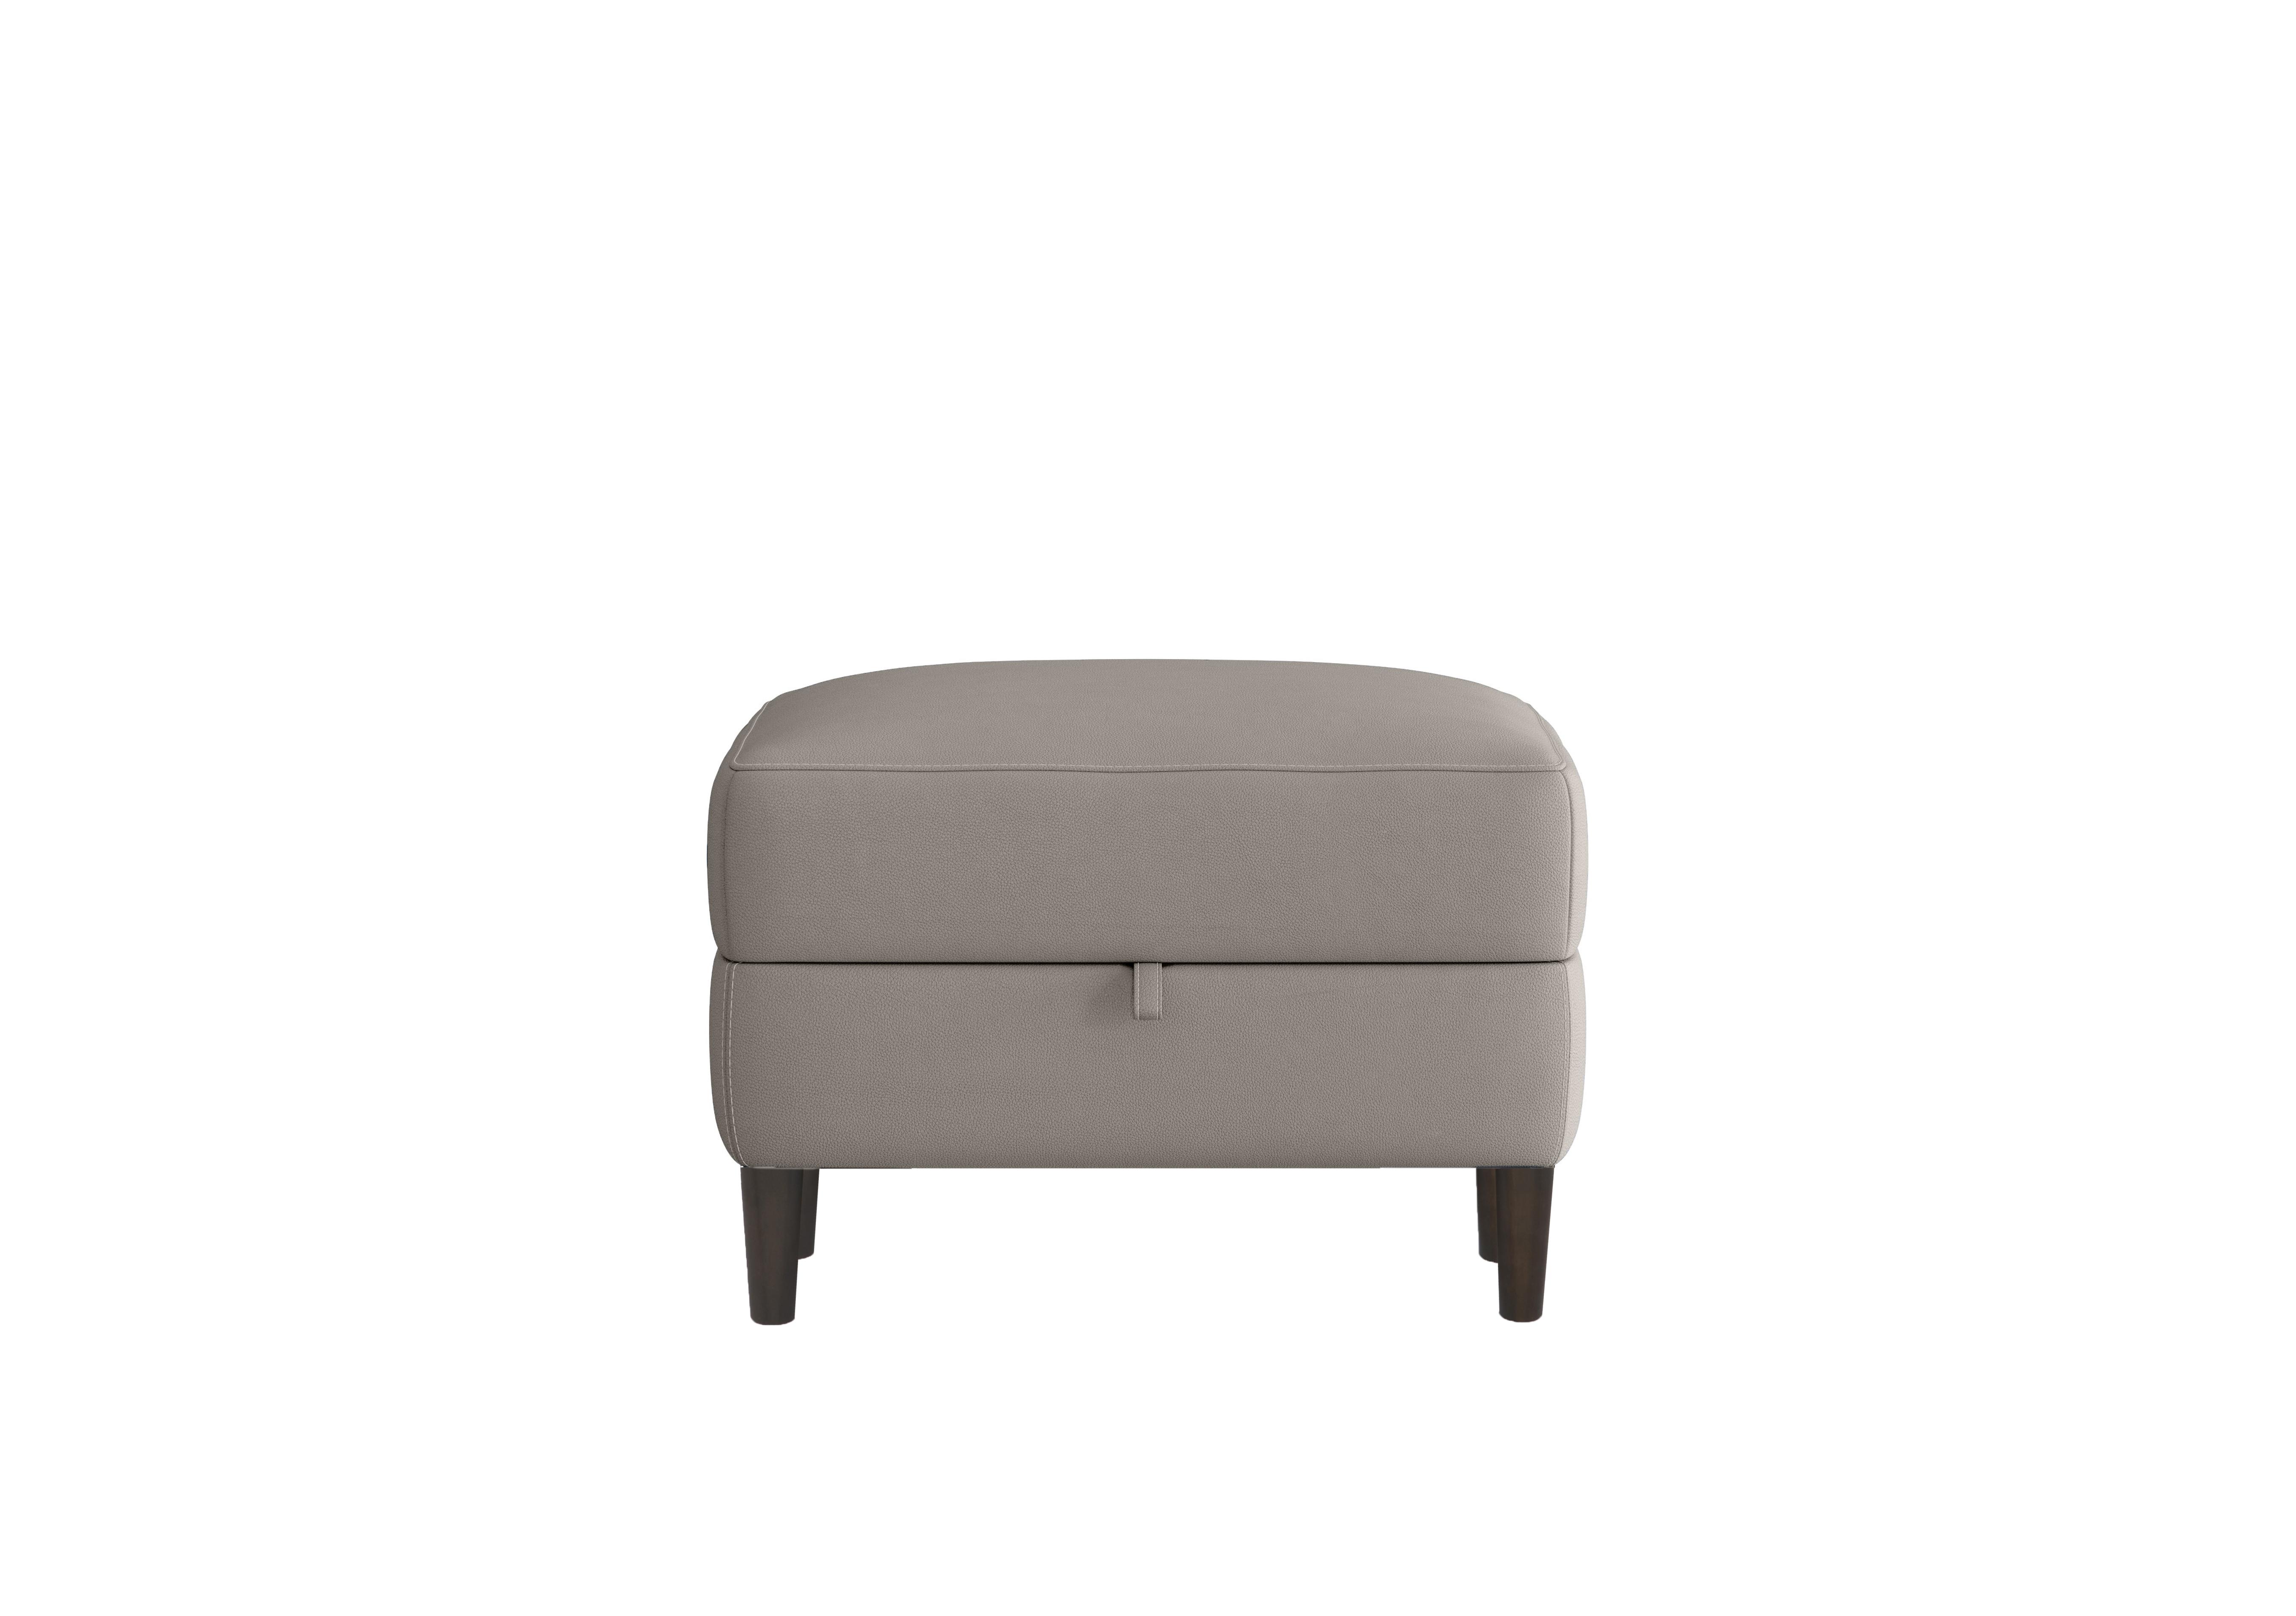 Uno Leather Storage Footstool in Bv-946b Silver Grey on Furniture Village